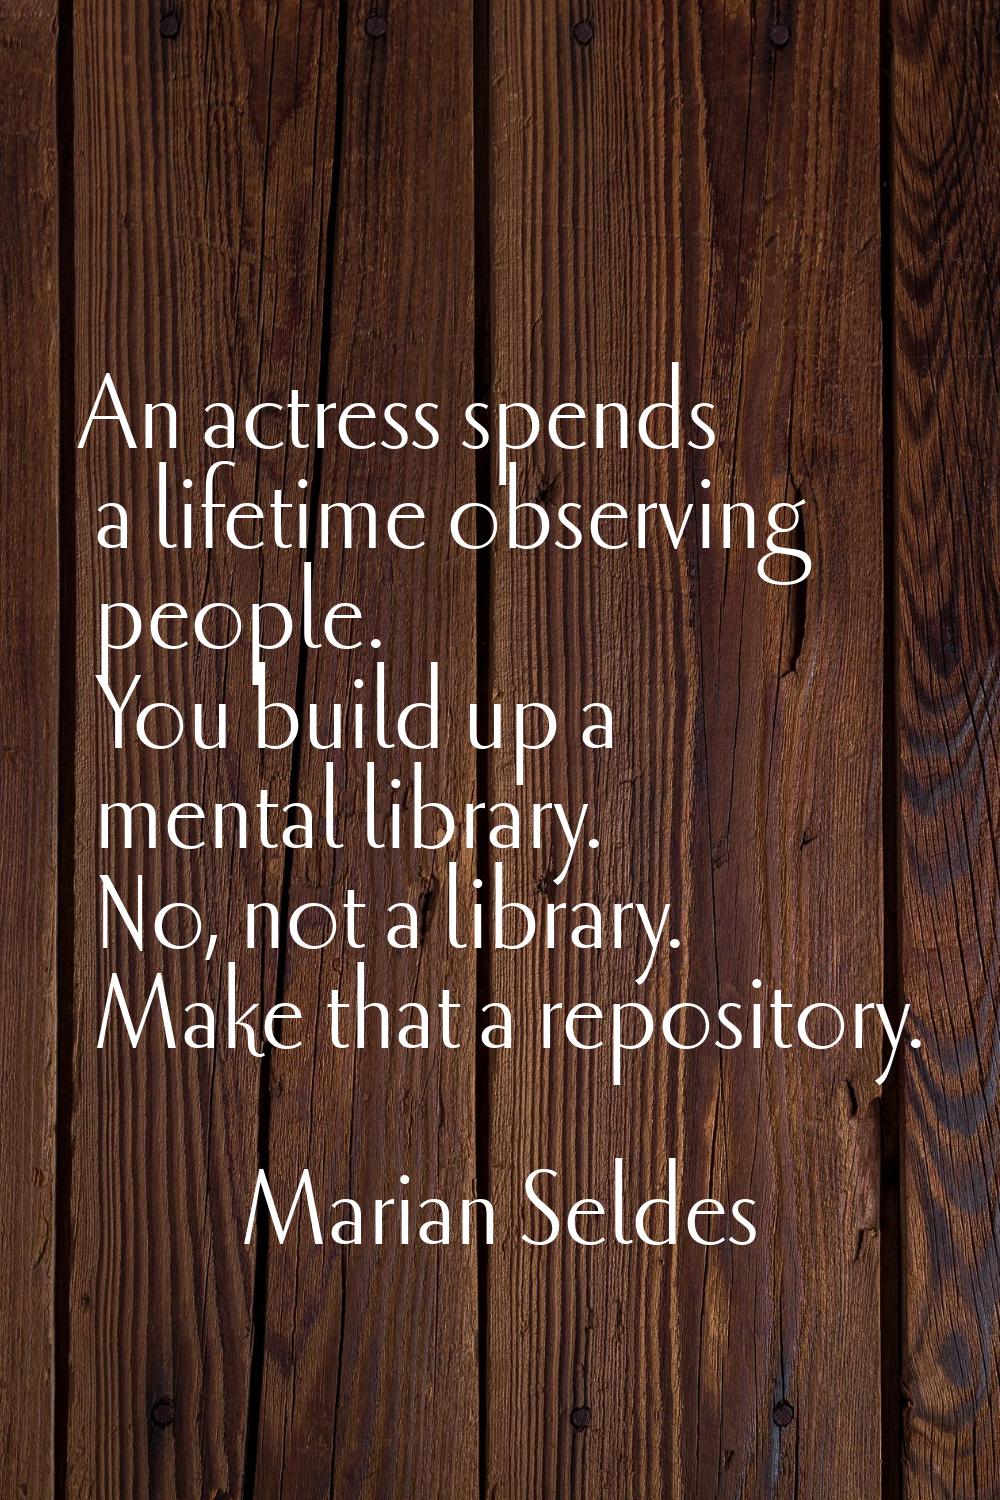 An actress spends a lifetime observing people. You build up a mental library. No, not a library. Ma